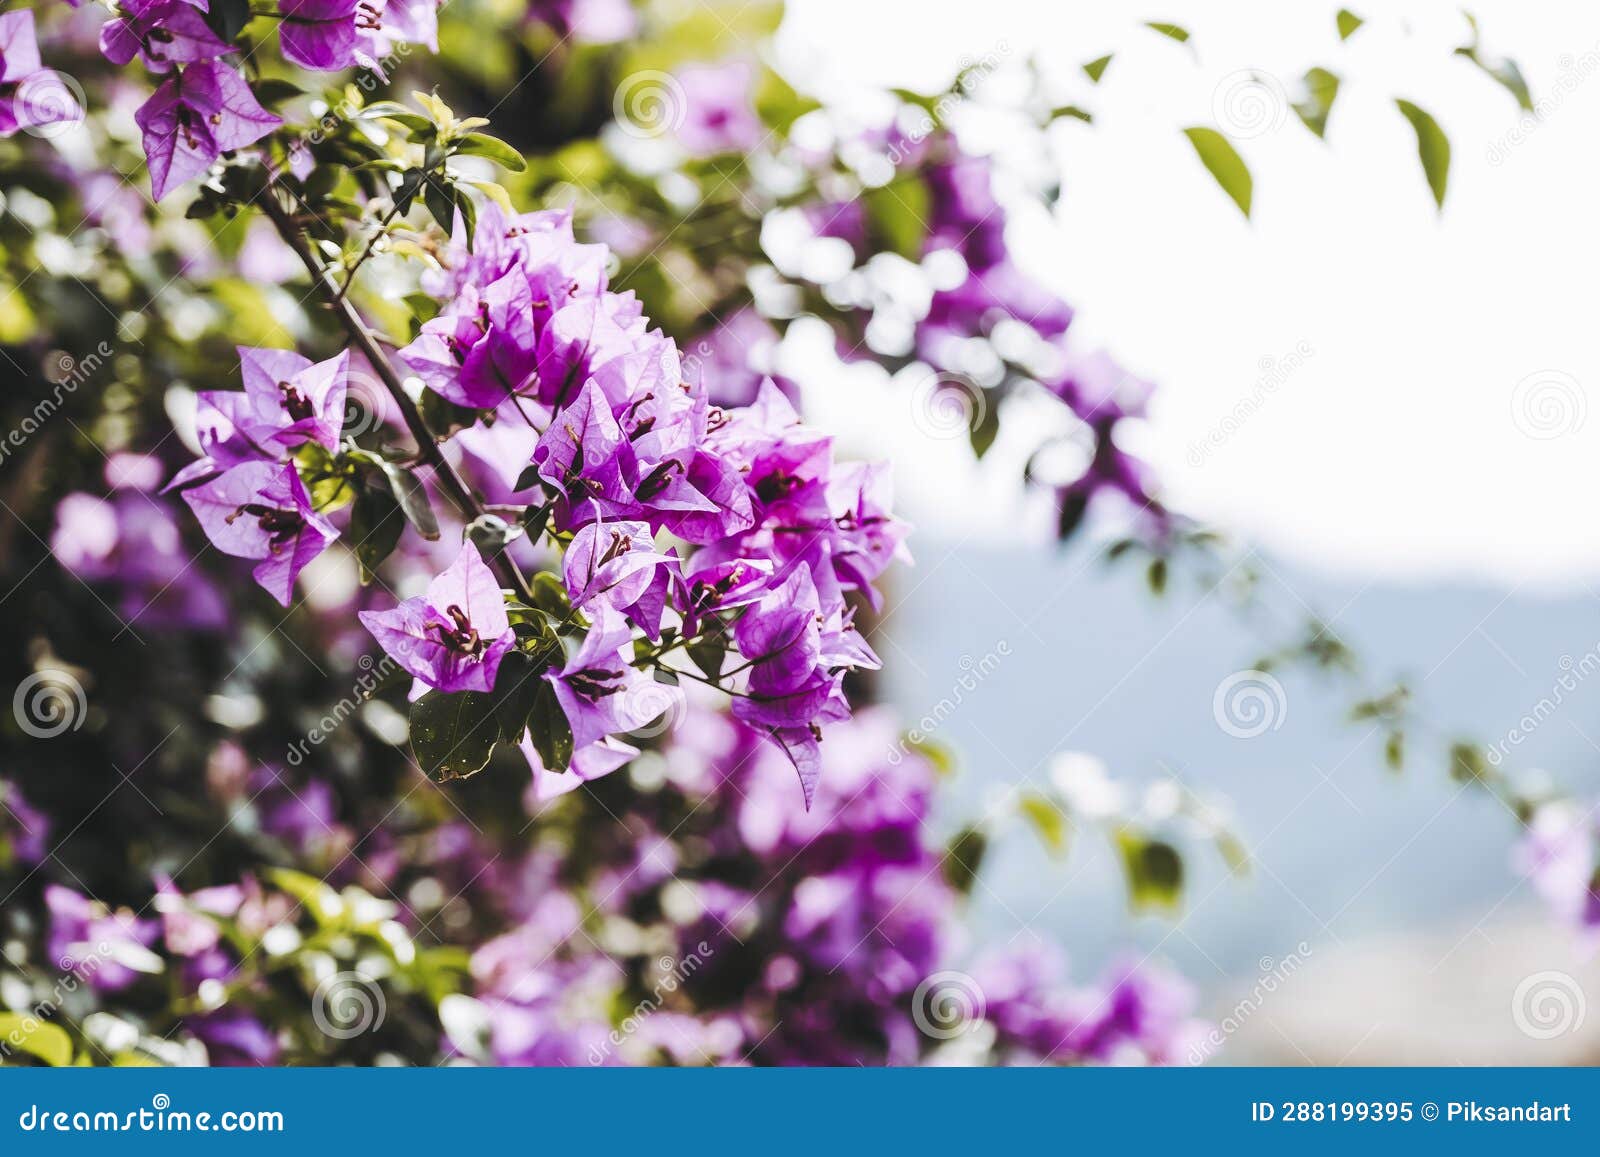 Beautiful Bougainvillea Creeper in an Alley Stock Image - Image of ...